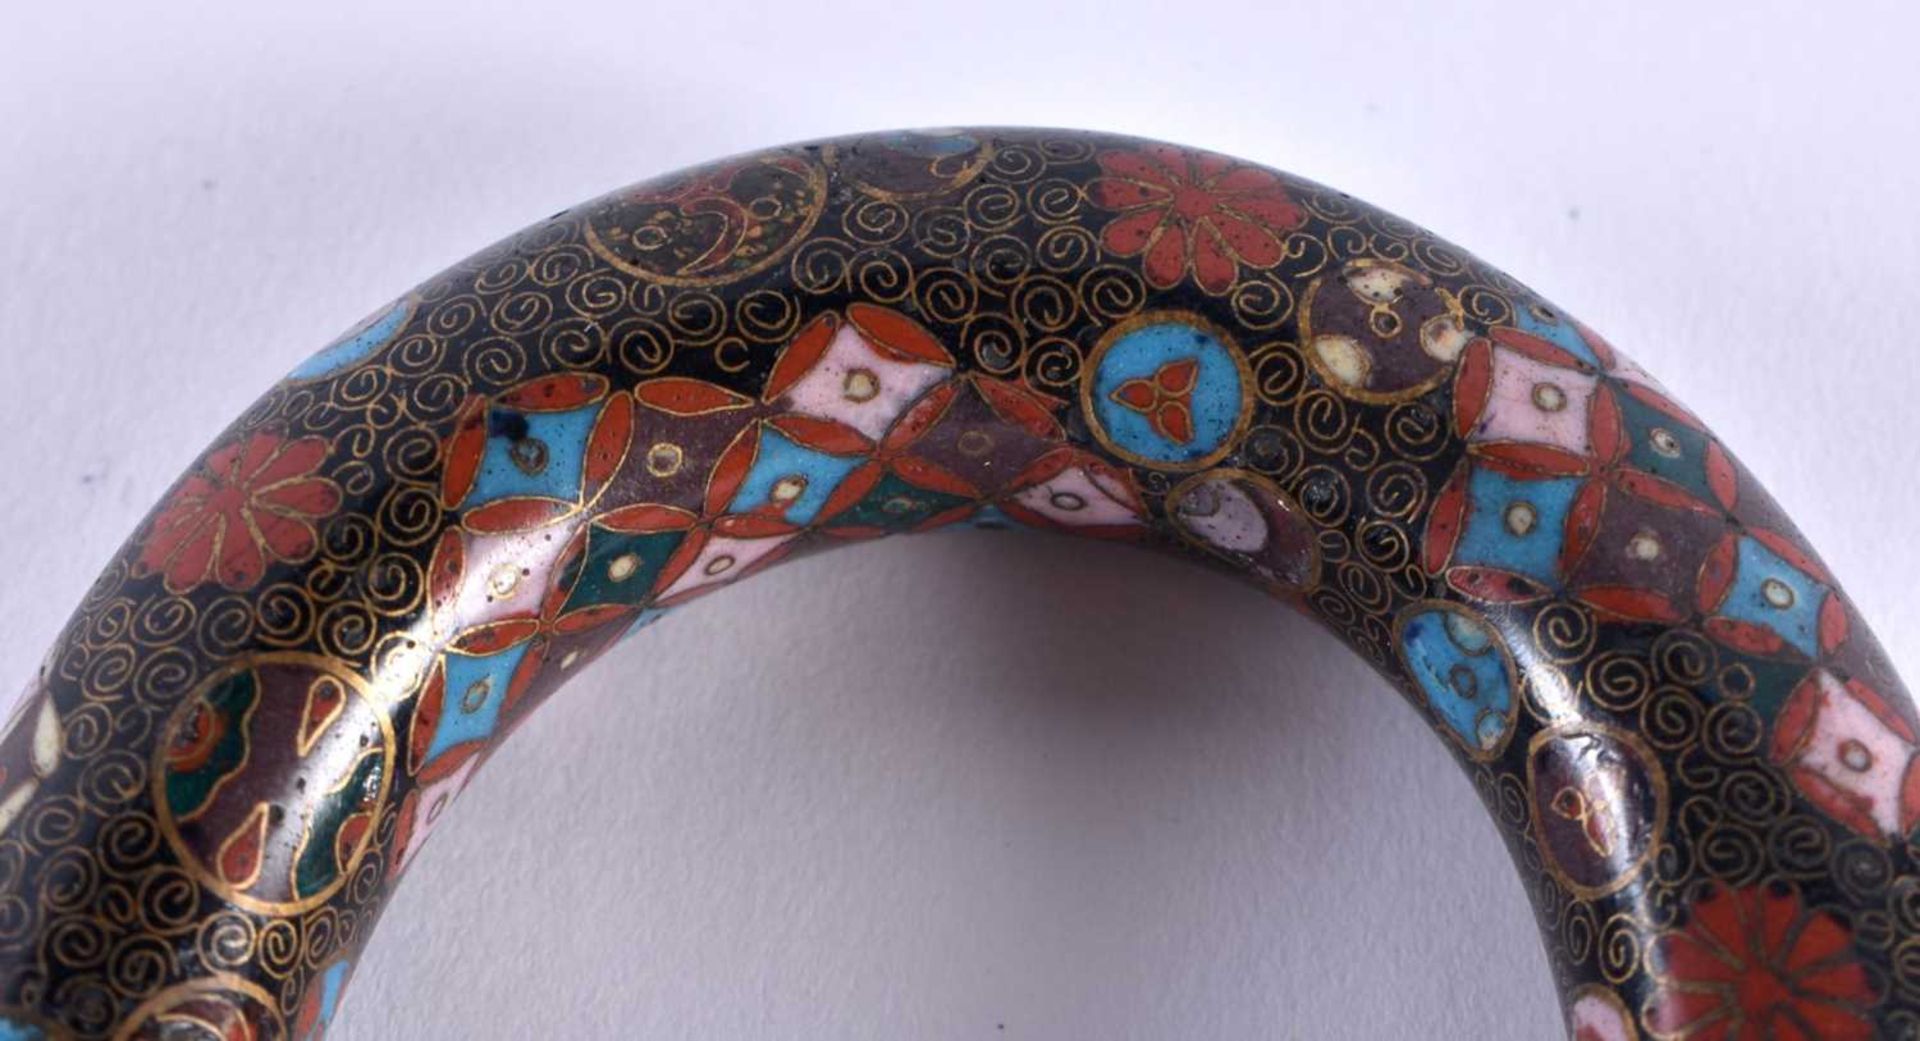 A FINE 19TH CENTURY JAPANESE MEIJI PERIOD CLOISONNE ENAMEL CANE HANDLE decorated with circular and - Image 2 of 6